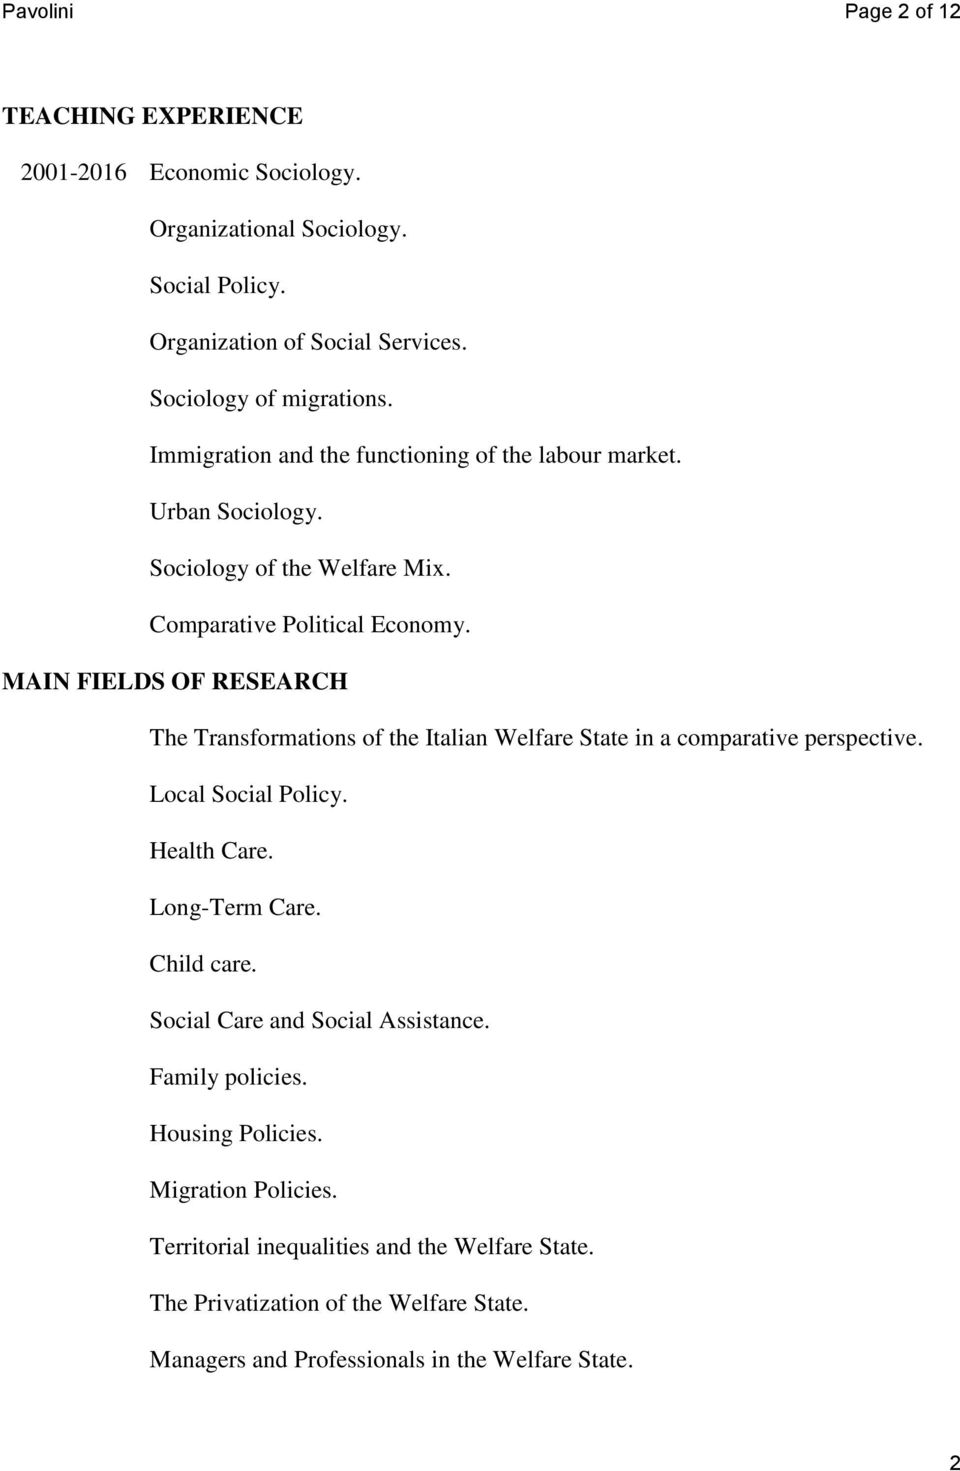 MAIN FIELDS OF RESEARCH The Transformations of the Italian Welfare State in a comparative perspective. Local Social Policy. Health Care. Long-Term Care. Child care.